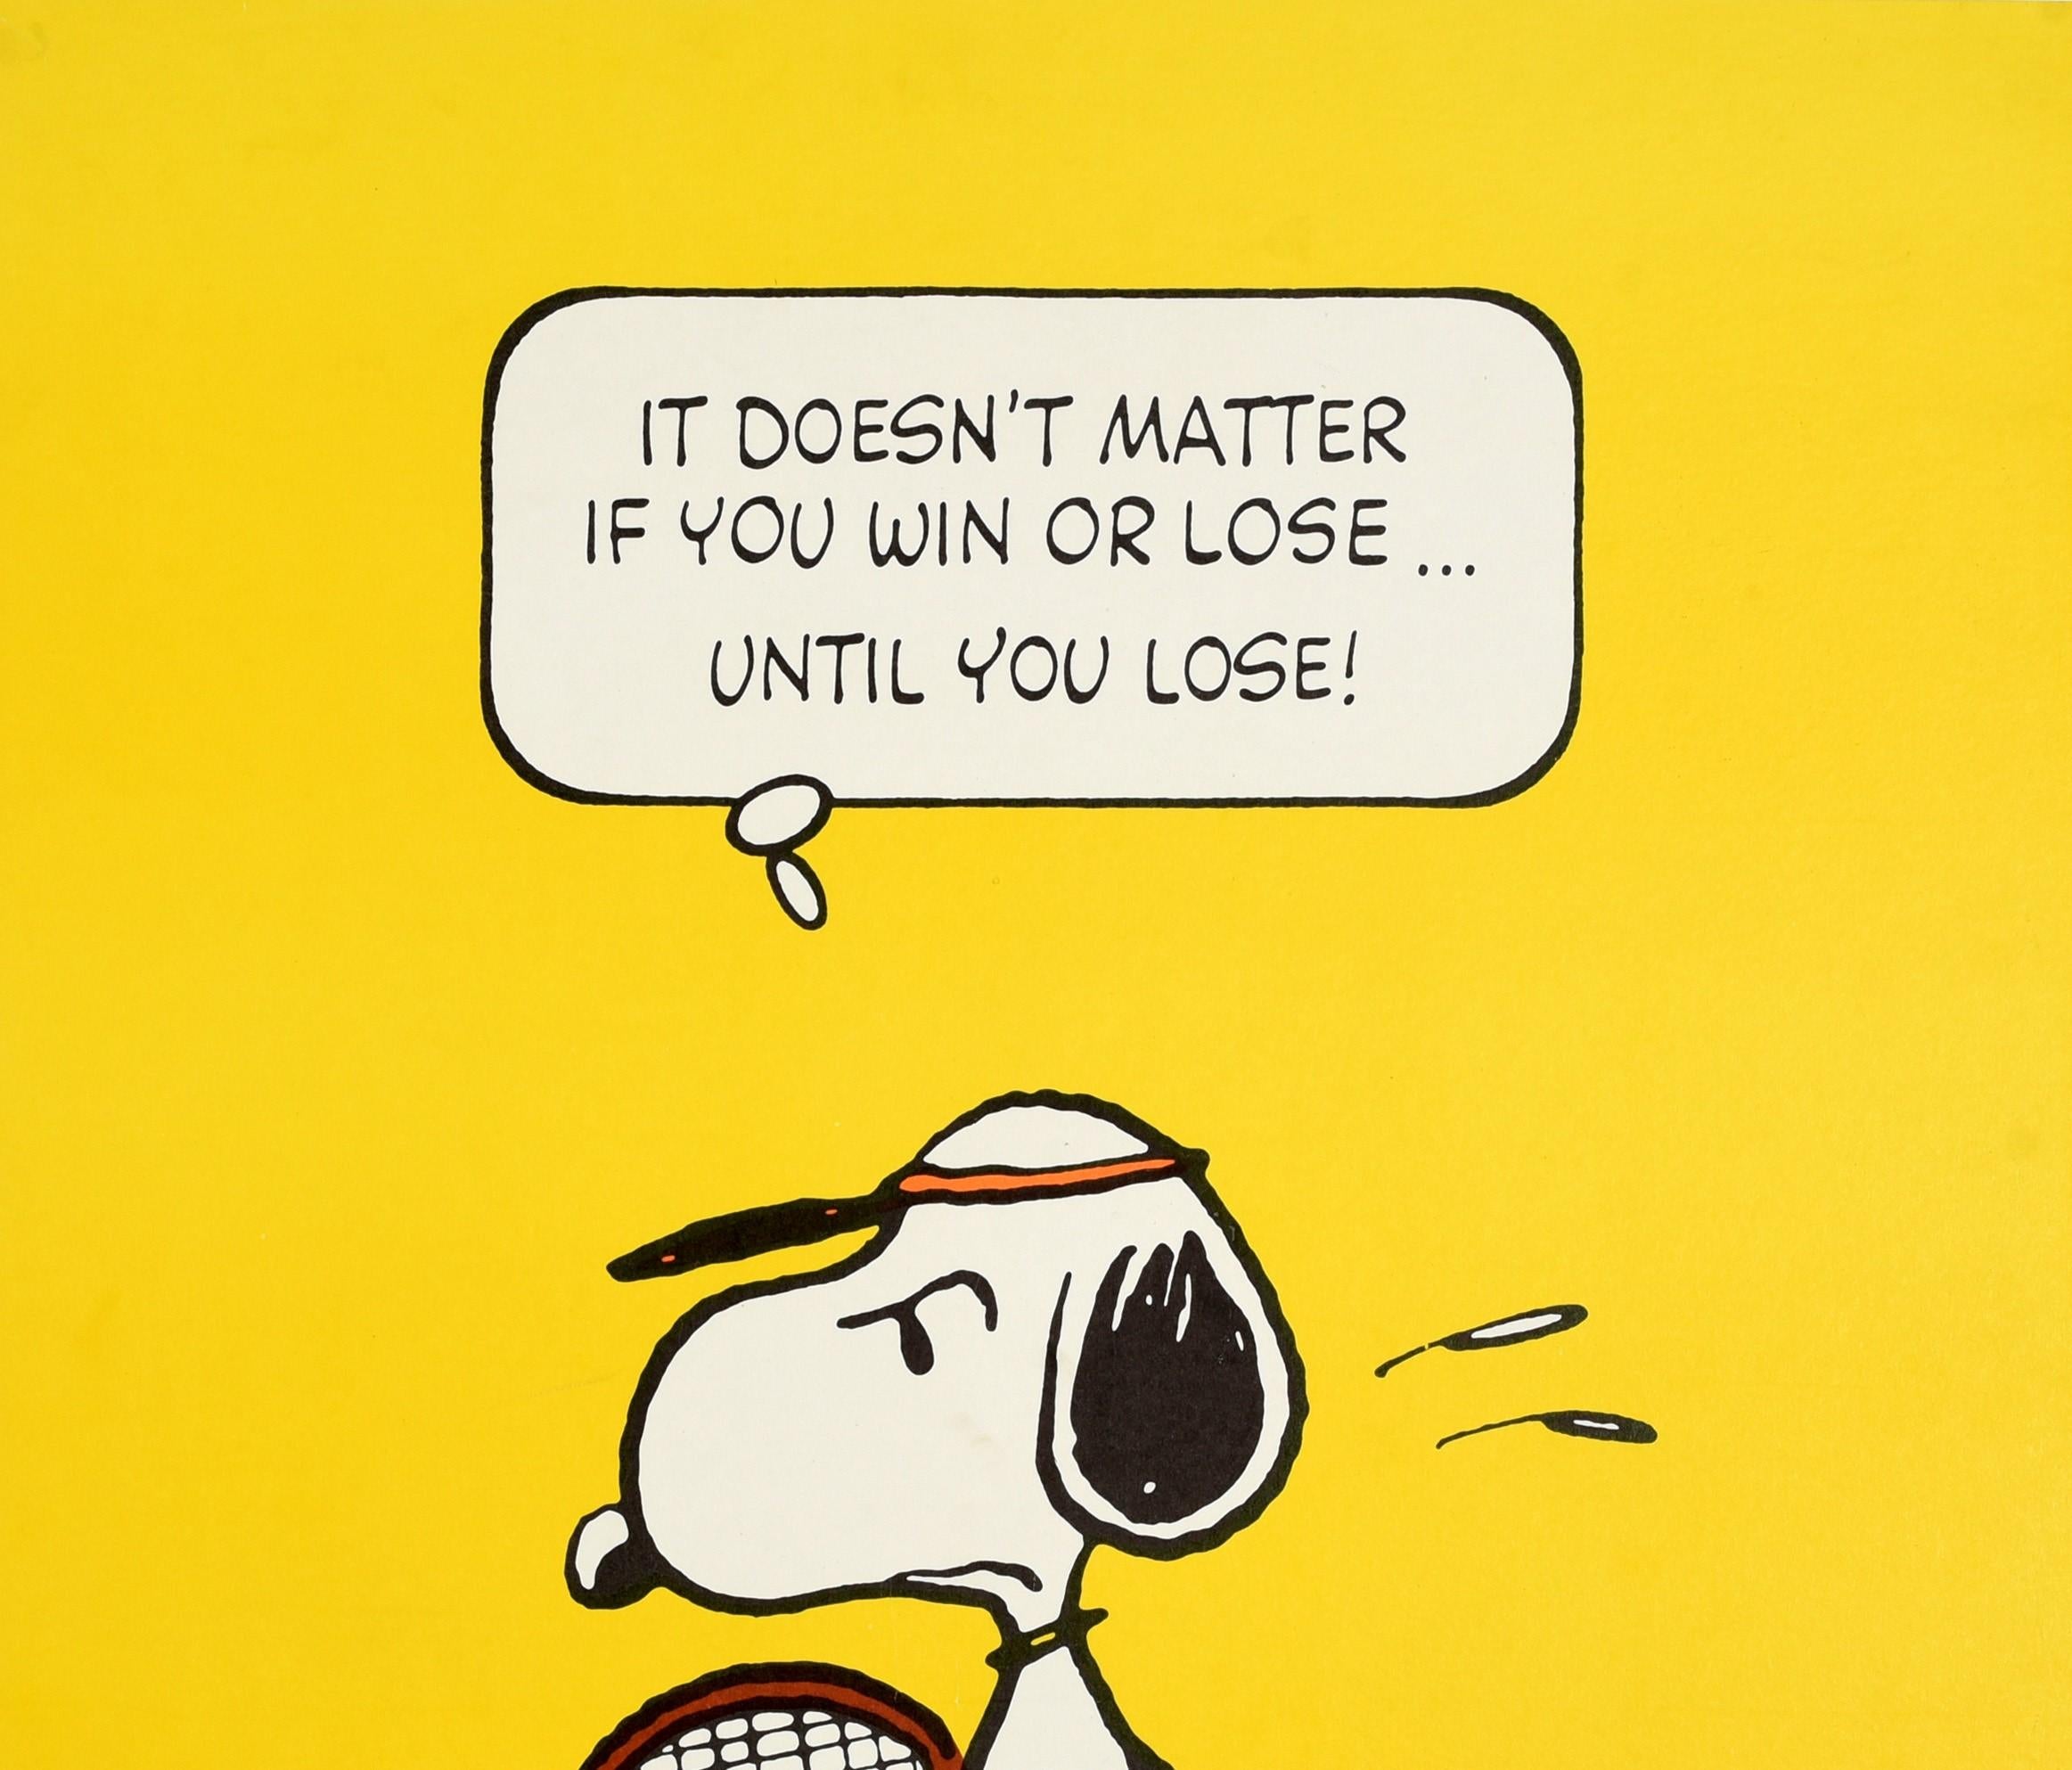 Original Vintage Snoopy Tennis Poster It Doesn't Matter If You Win Or Lose Quote - Print by Charles M. Schulz